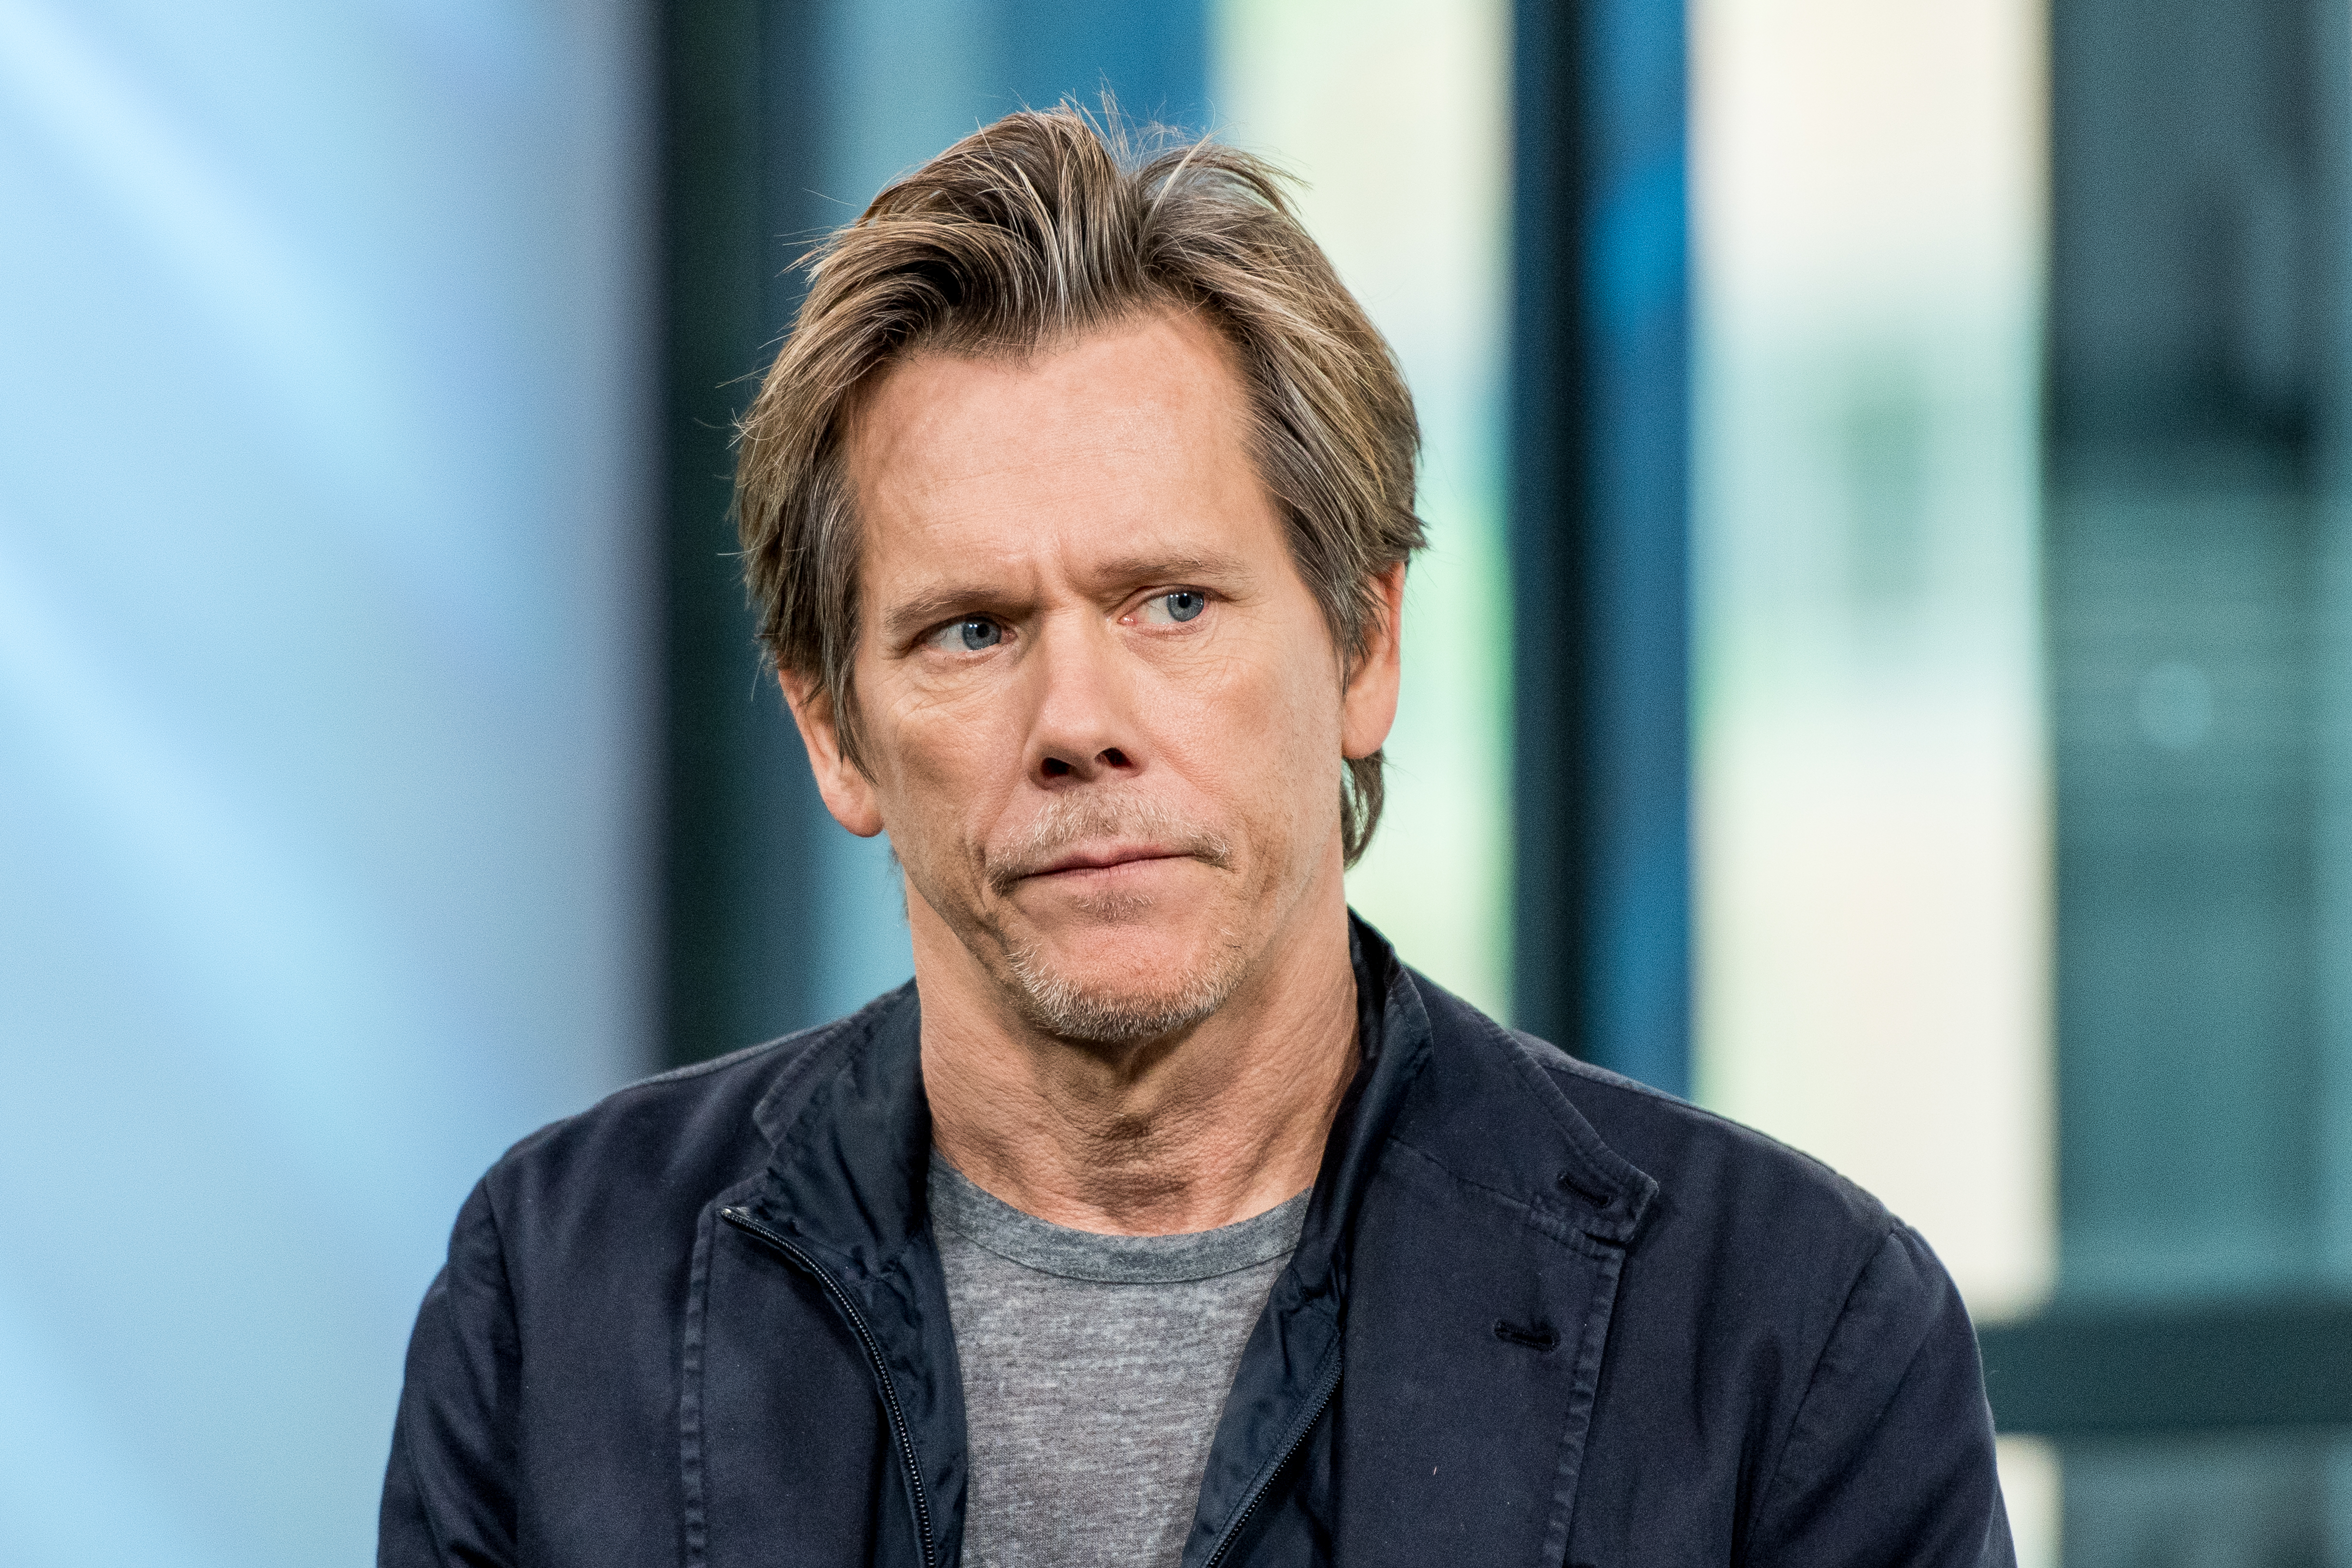 Actor Kevin Bacon discusses "I Love Dick" with the Build Series at Build Studio on May 8, 2017, in New York City. | Source: Getty Images